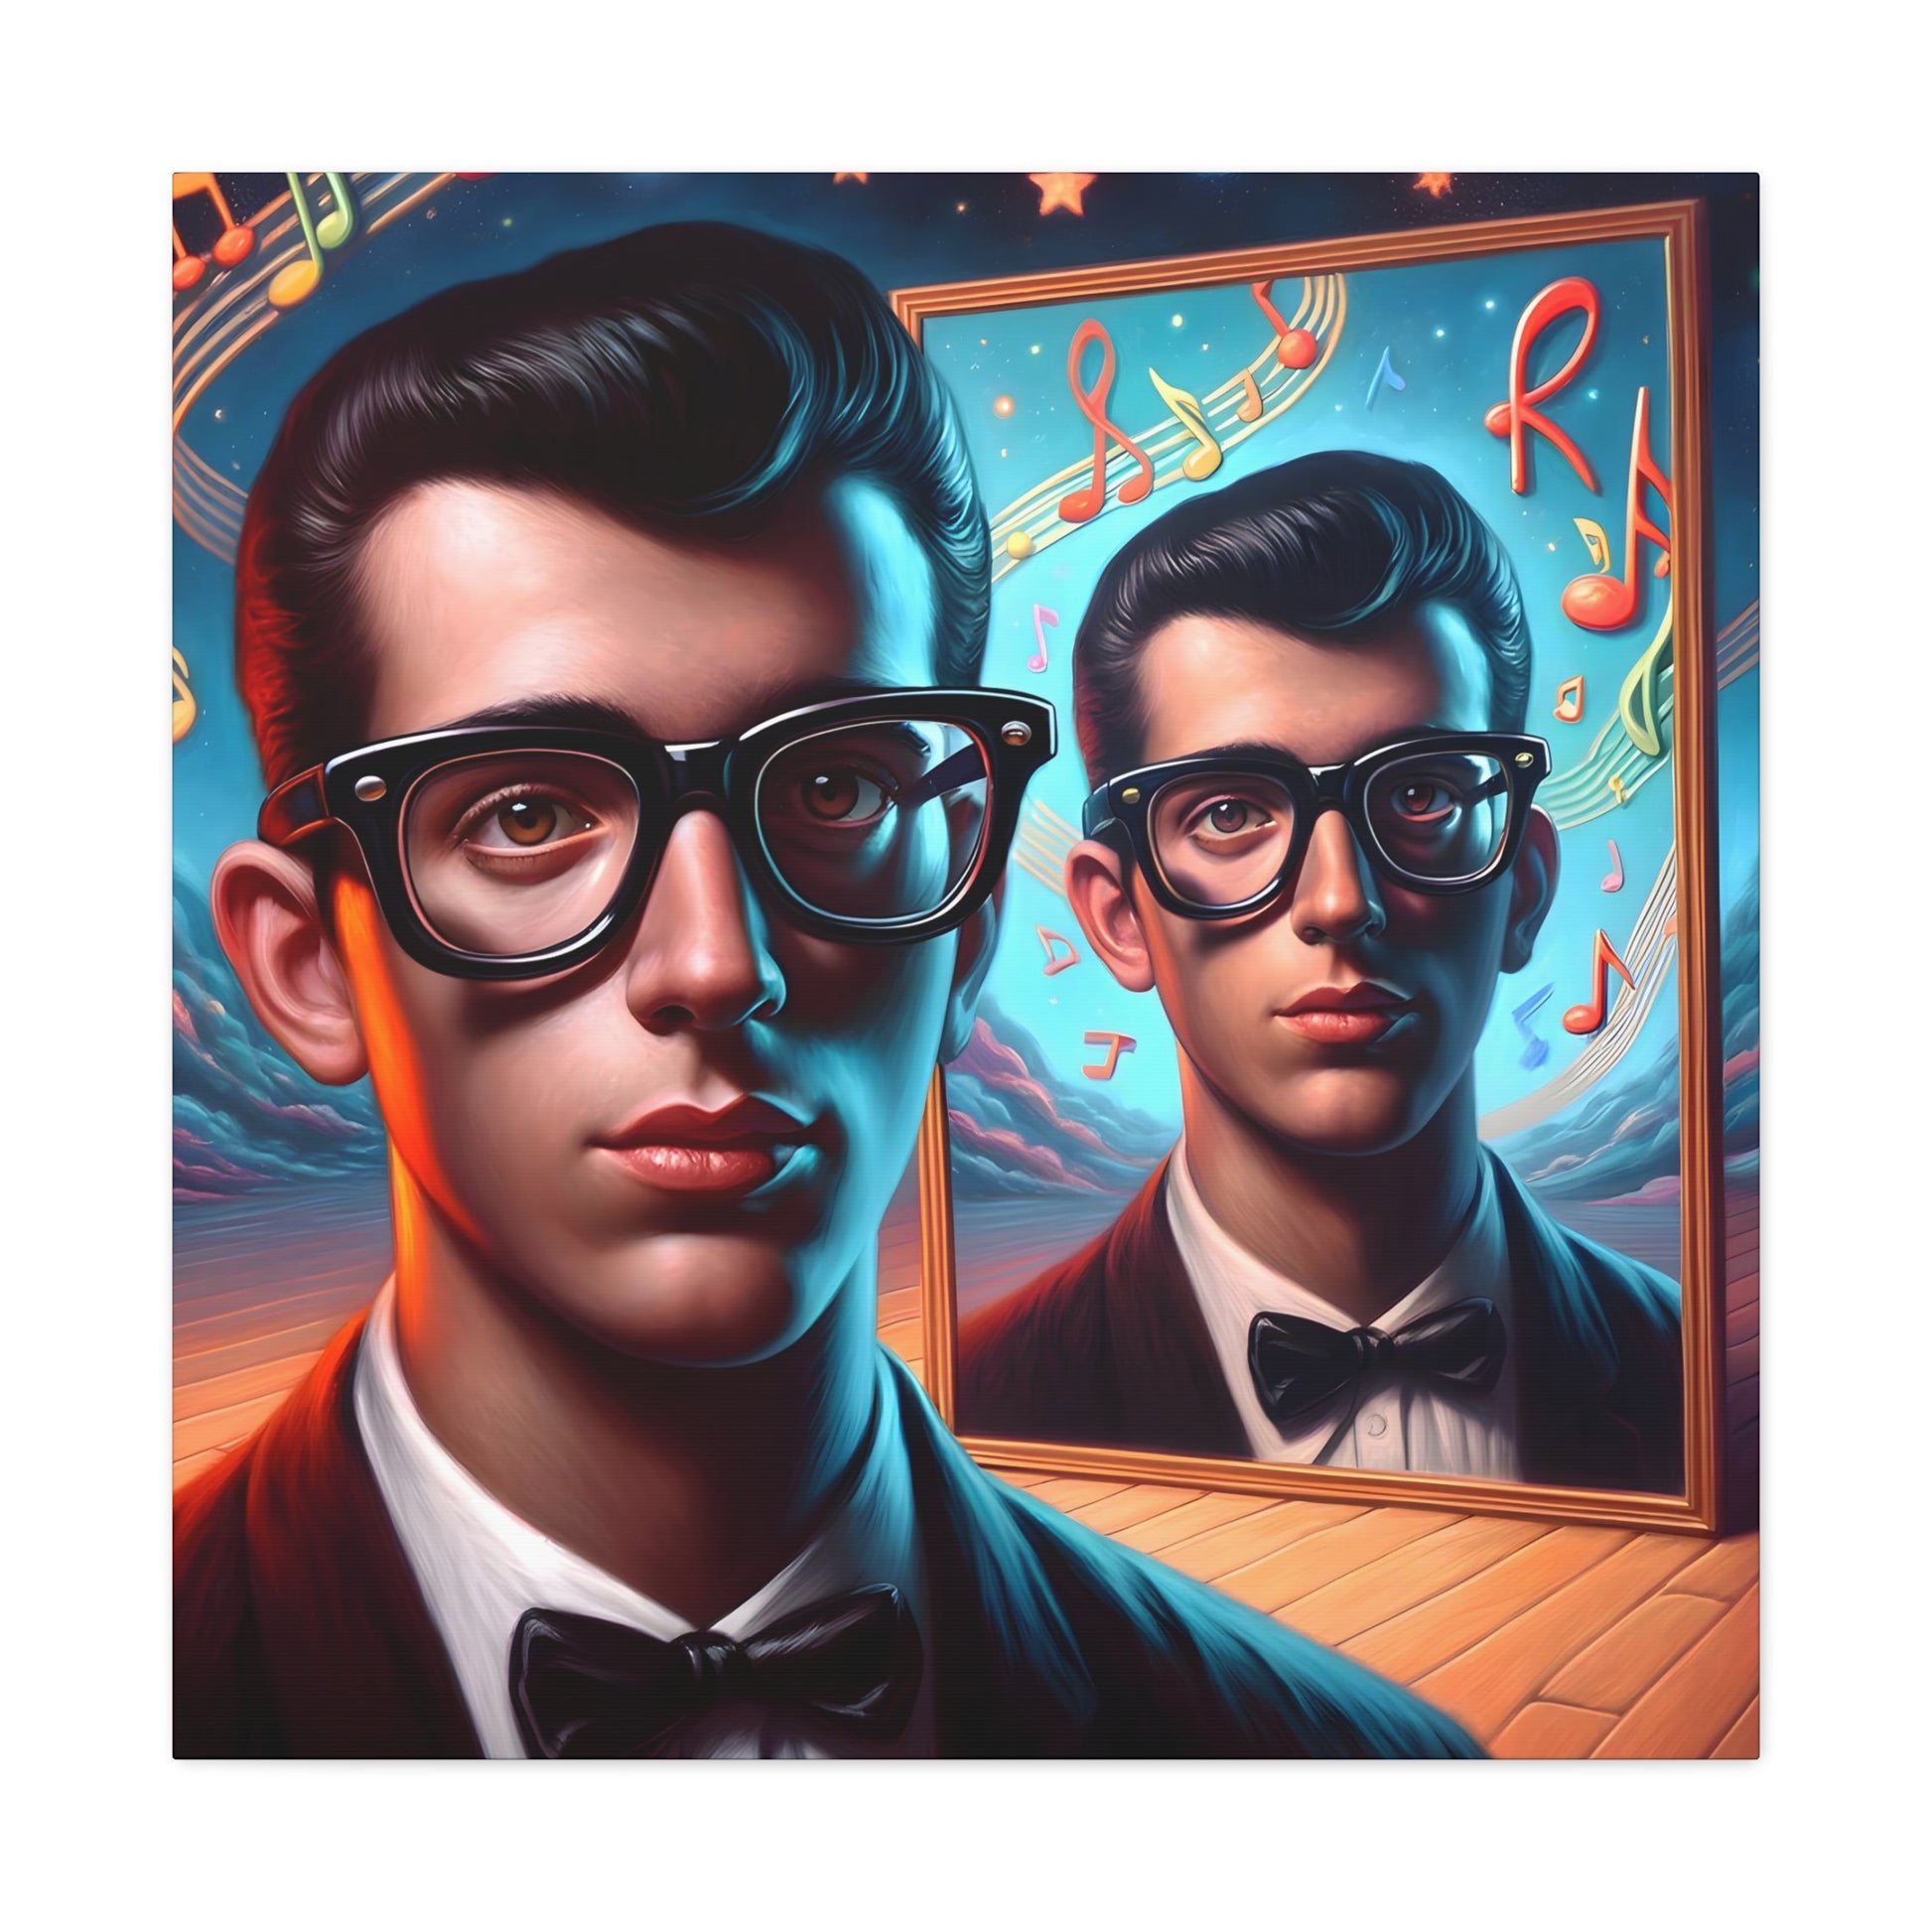 image 2 Vibrant retro-inspired artwork capturing the essence of the 1950s rock and roll era. Features a cool vintage figure with slick hair and thick-rimmed glasses, gazing into a mirror that reflects a dreamy, music-filled cosmos with musical notes and celestial bodies. Warm color palette with twilight blues, depicting an intimate yet imaginative scene reminiscent of vinyl and jukeboxes.